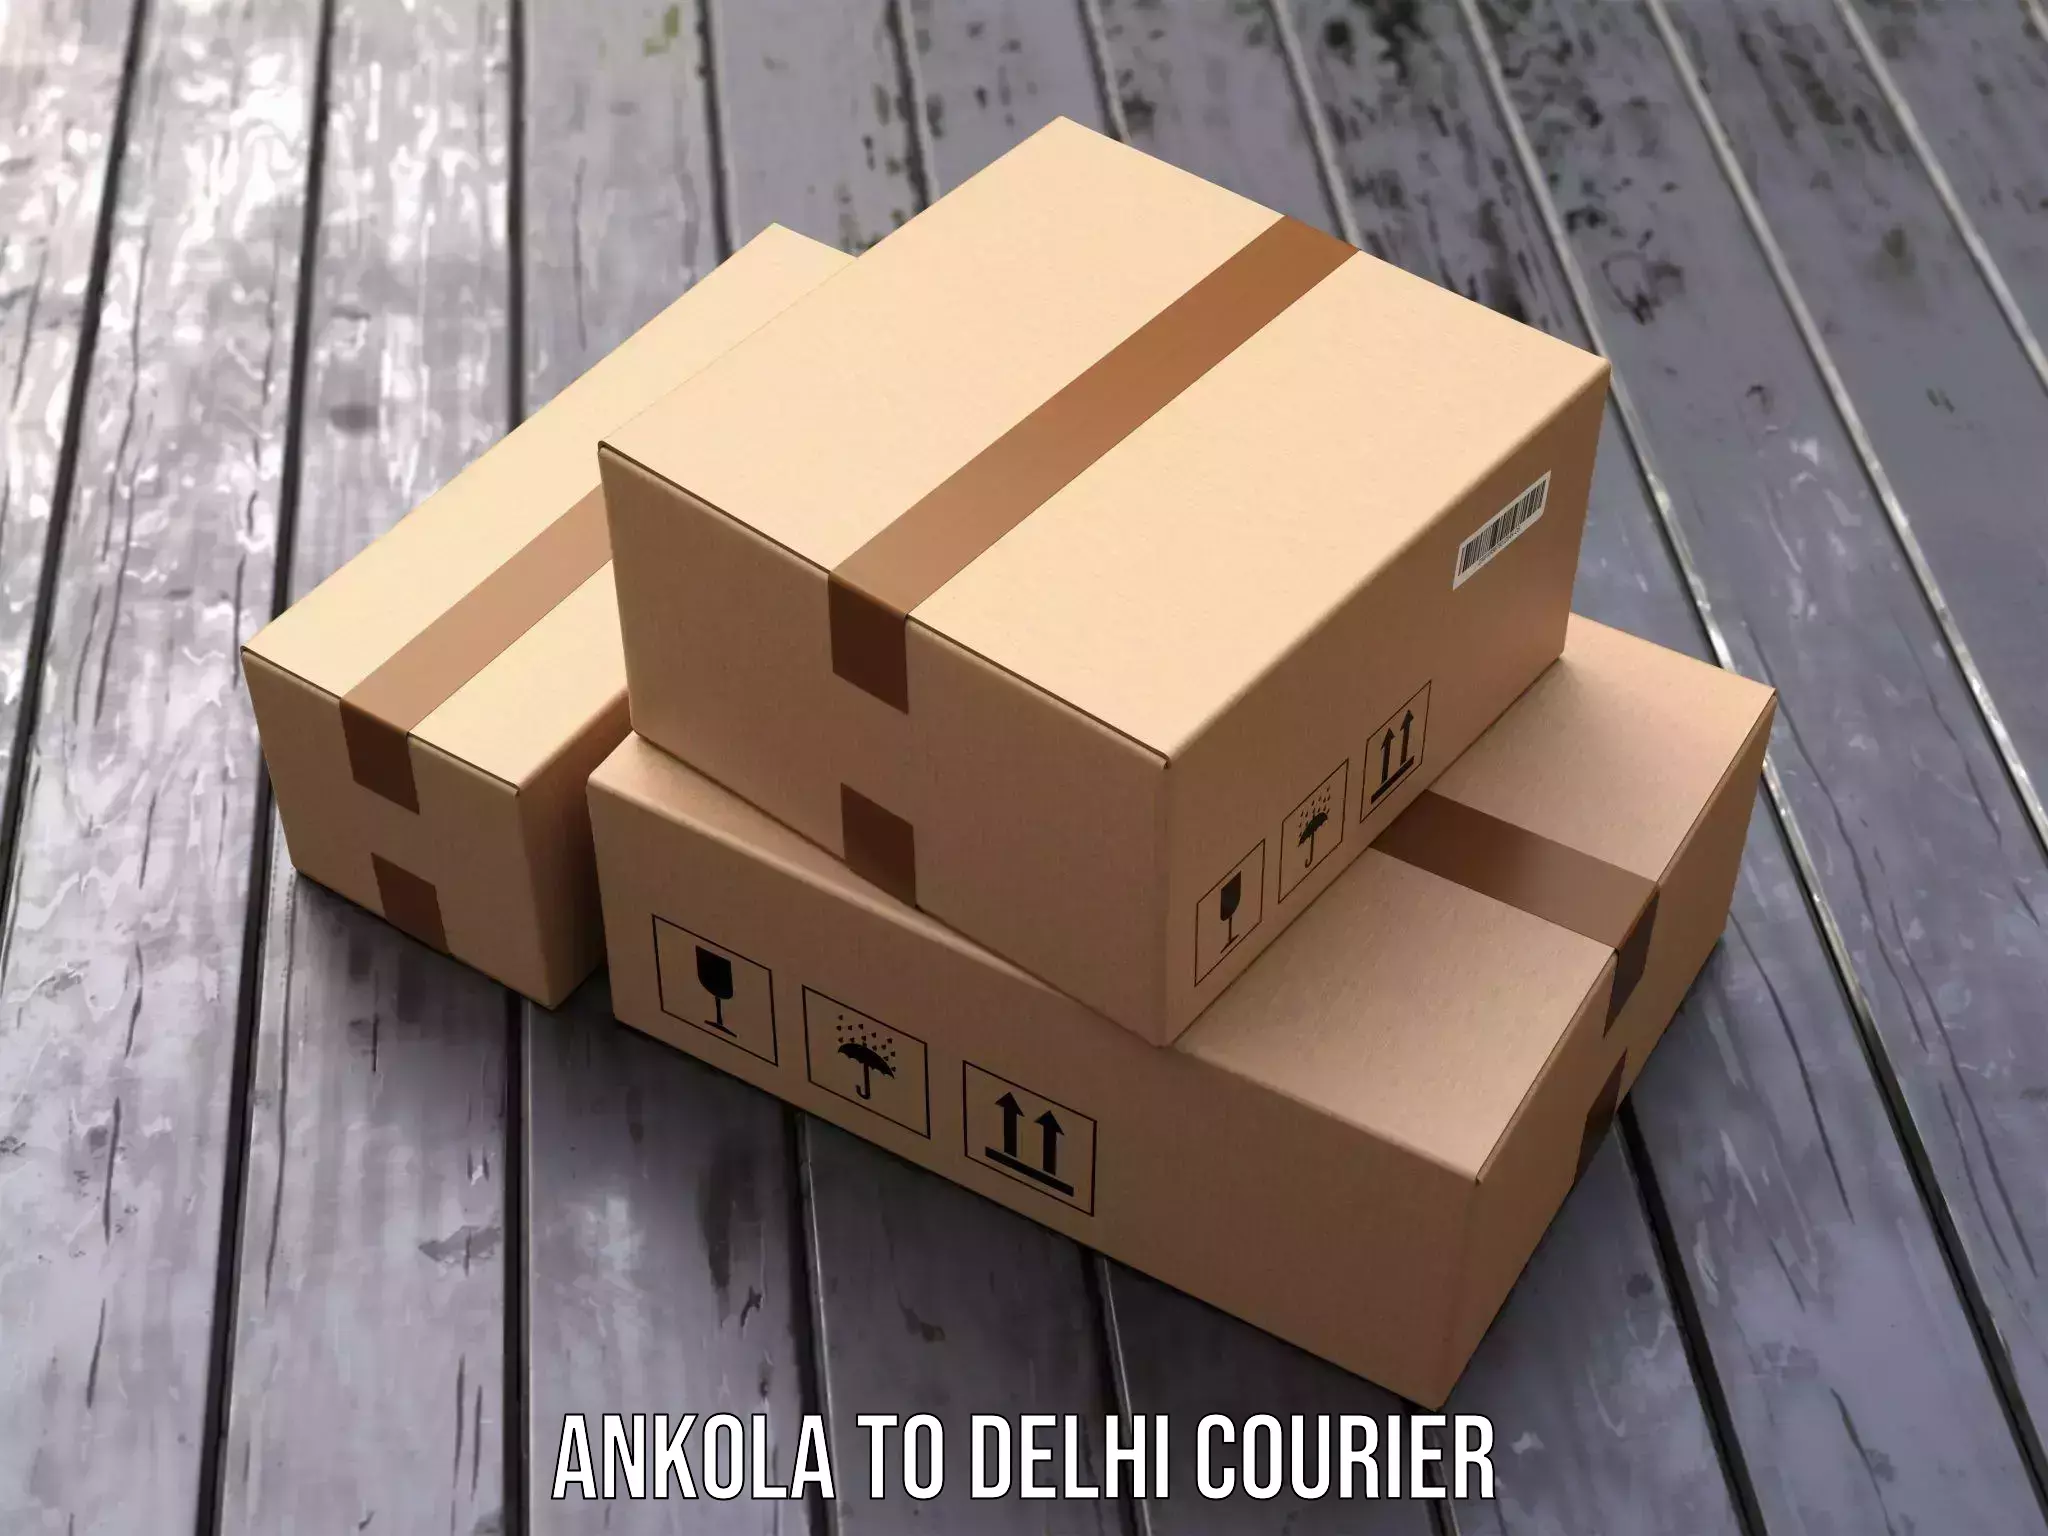 Cash on delivery service Ankola to NCR